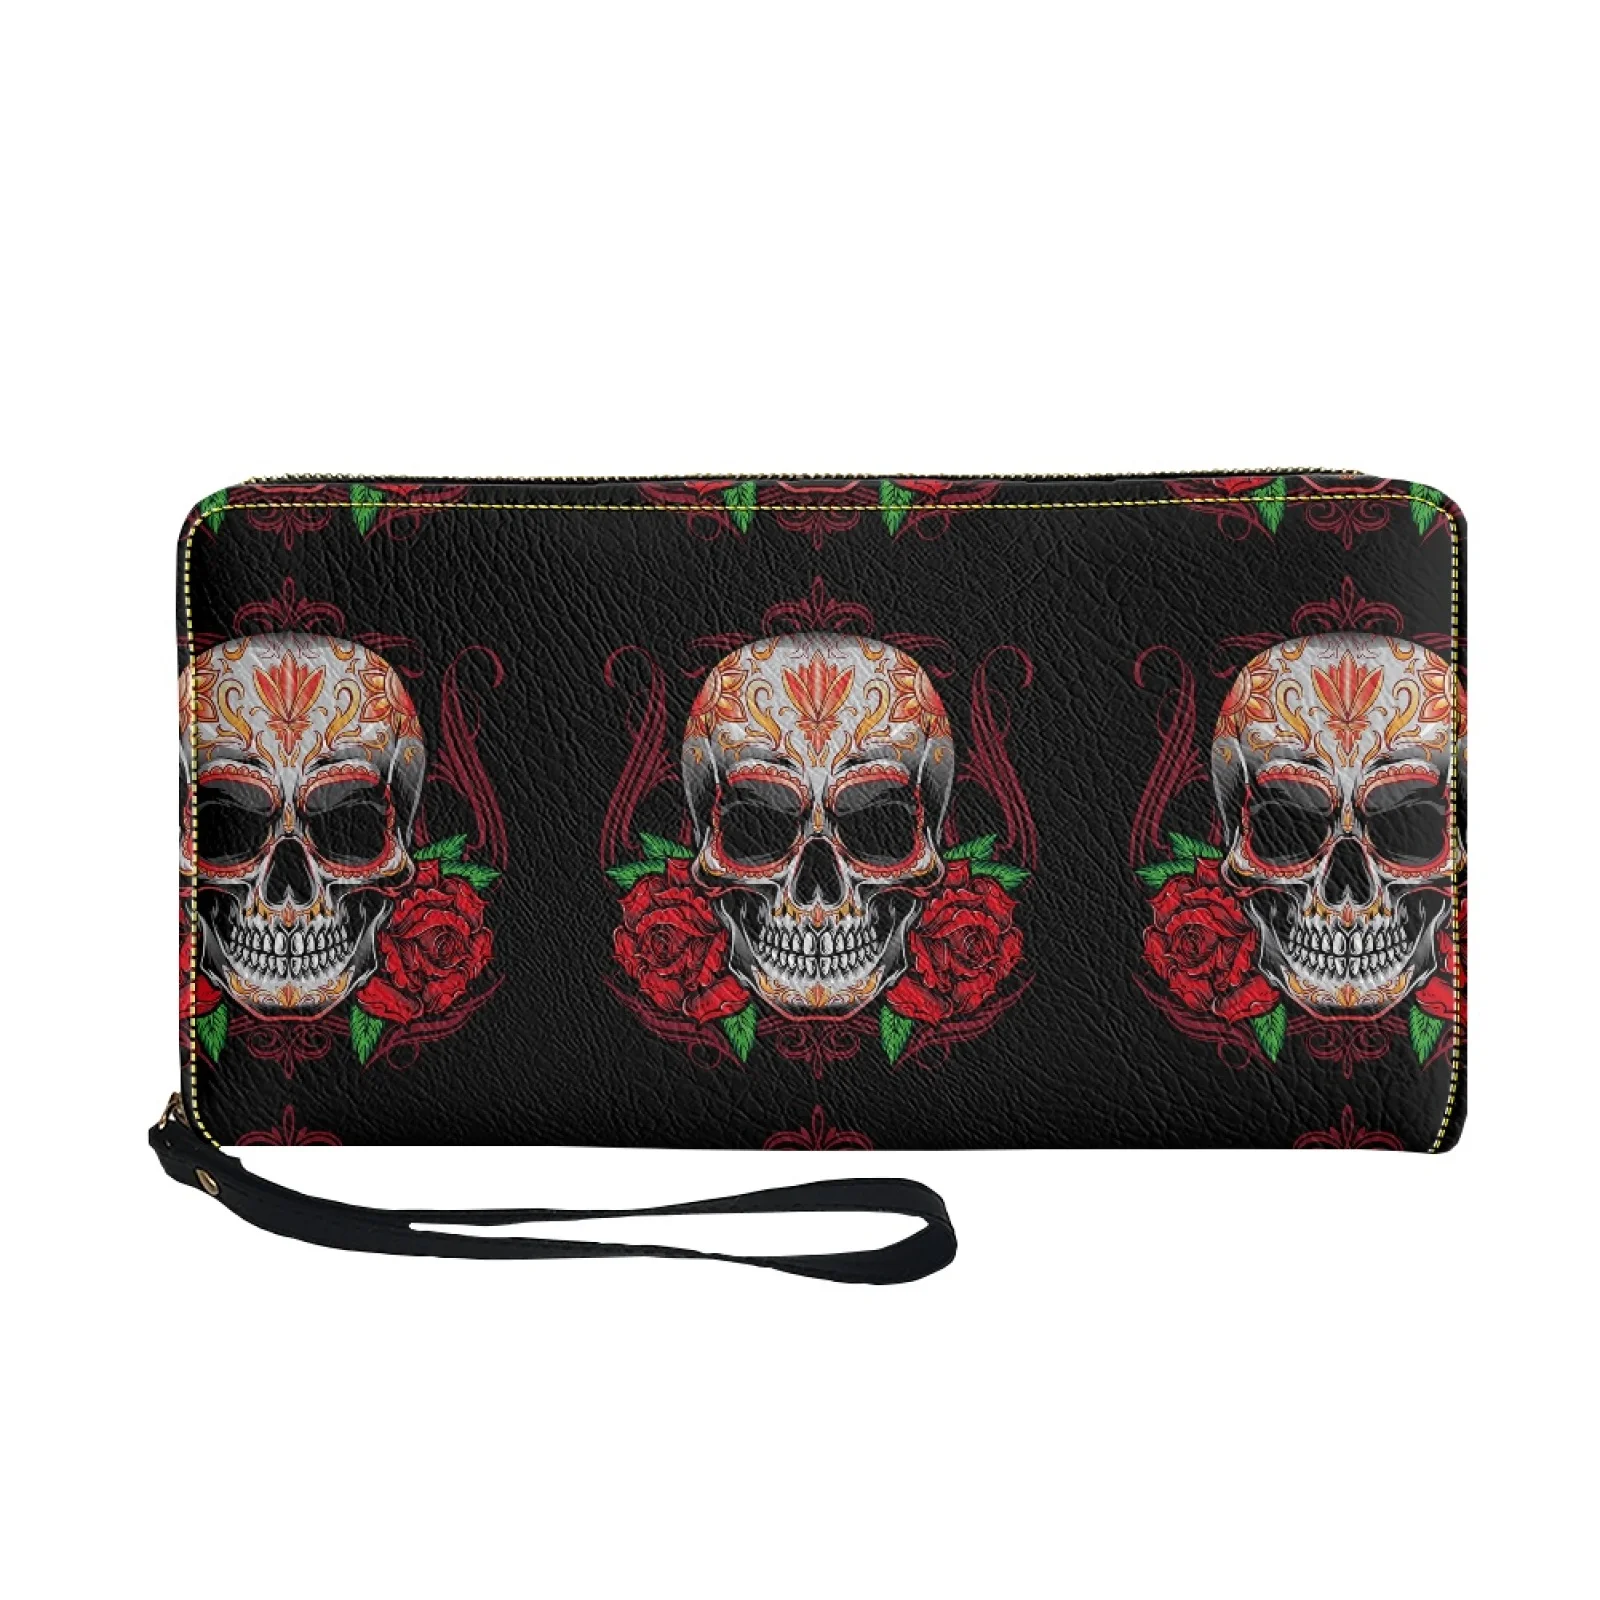 Women Wallet Yorkshire Skull Pattern Print Female Casual Leather Purse Long Clutch Bags